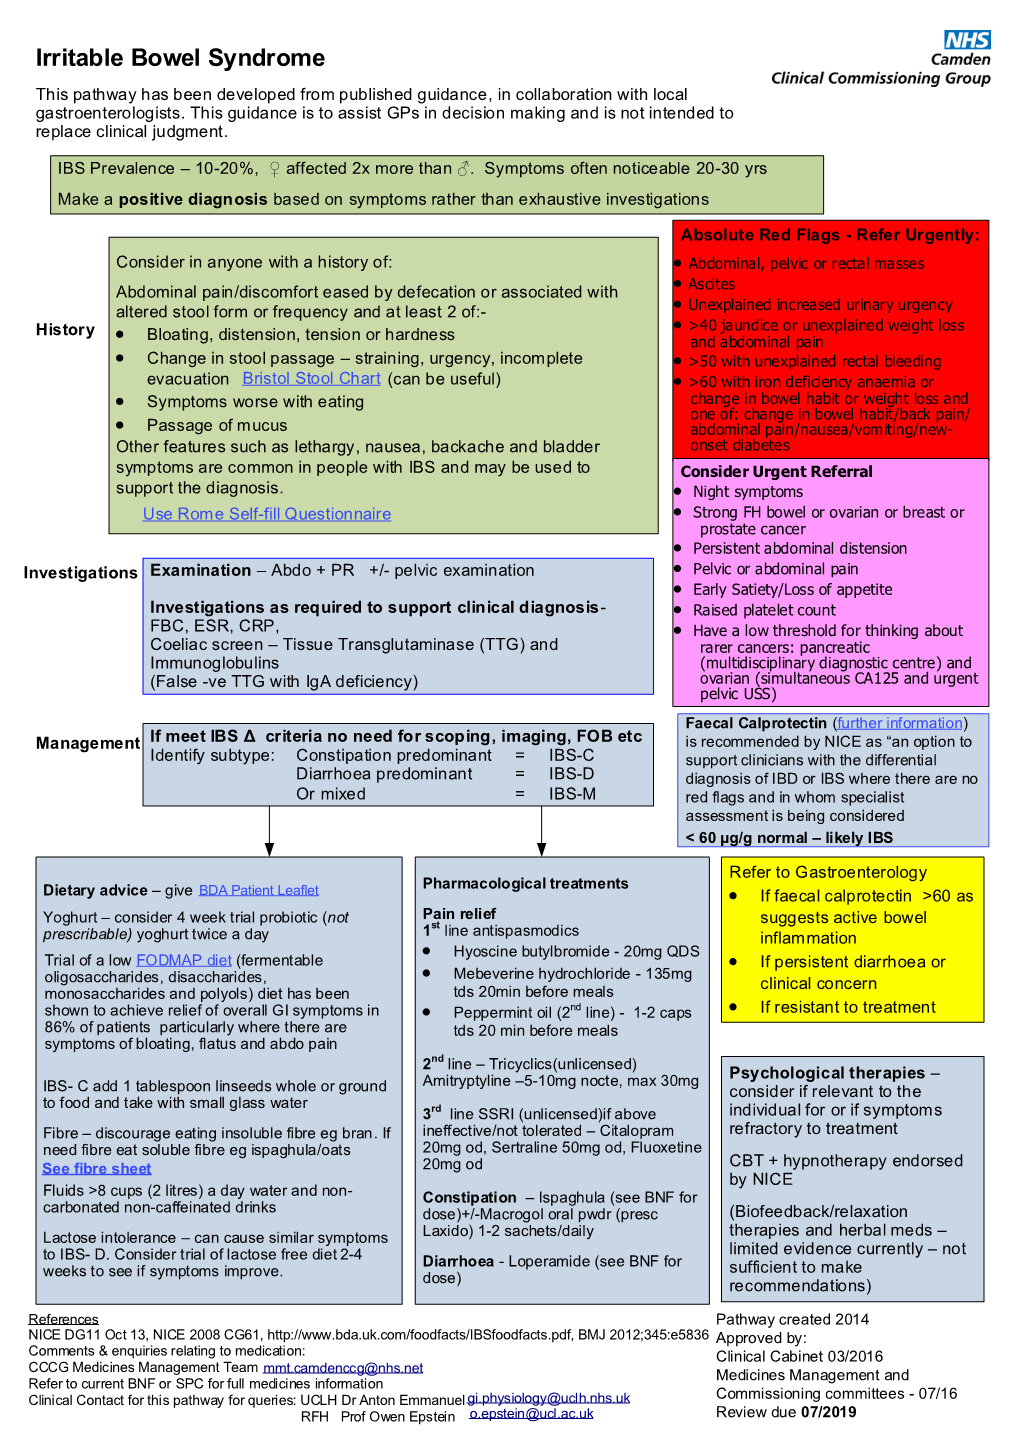 Irritable Bowel Syndrome This Pathway Has Been Developed from Published Guidance, in Collaboration with Local Gastroenterologists